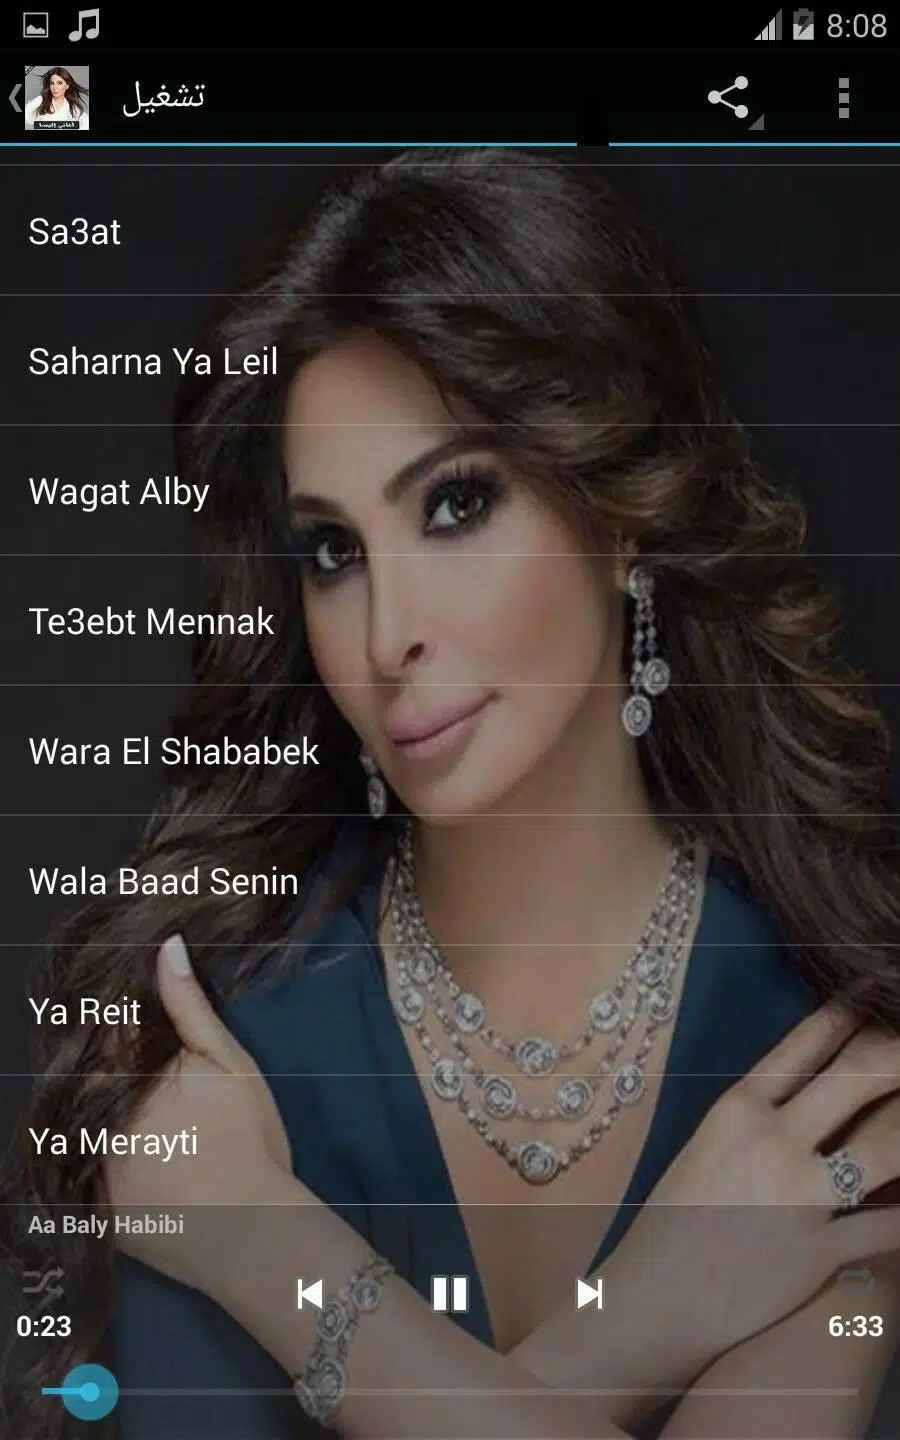 Elissa mp3 - اغاني اليسا 2018 APK for Android Download